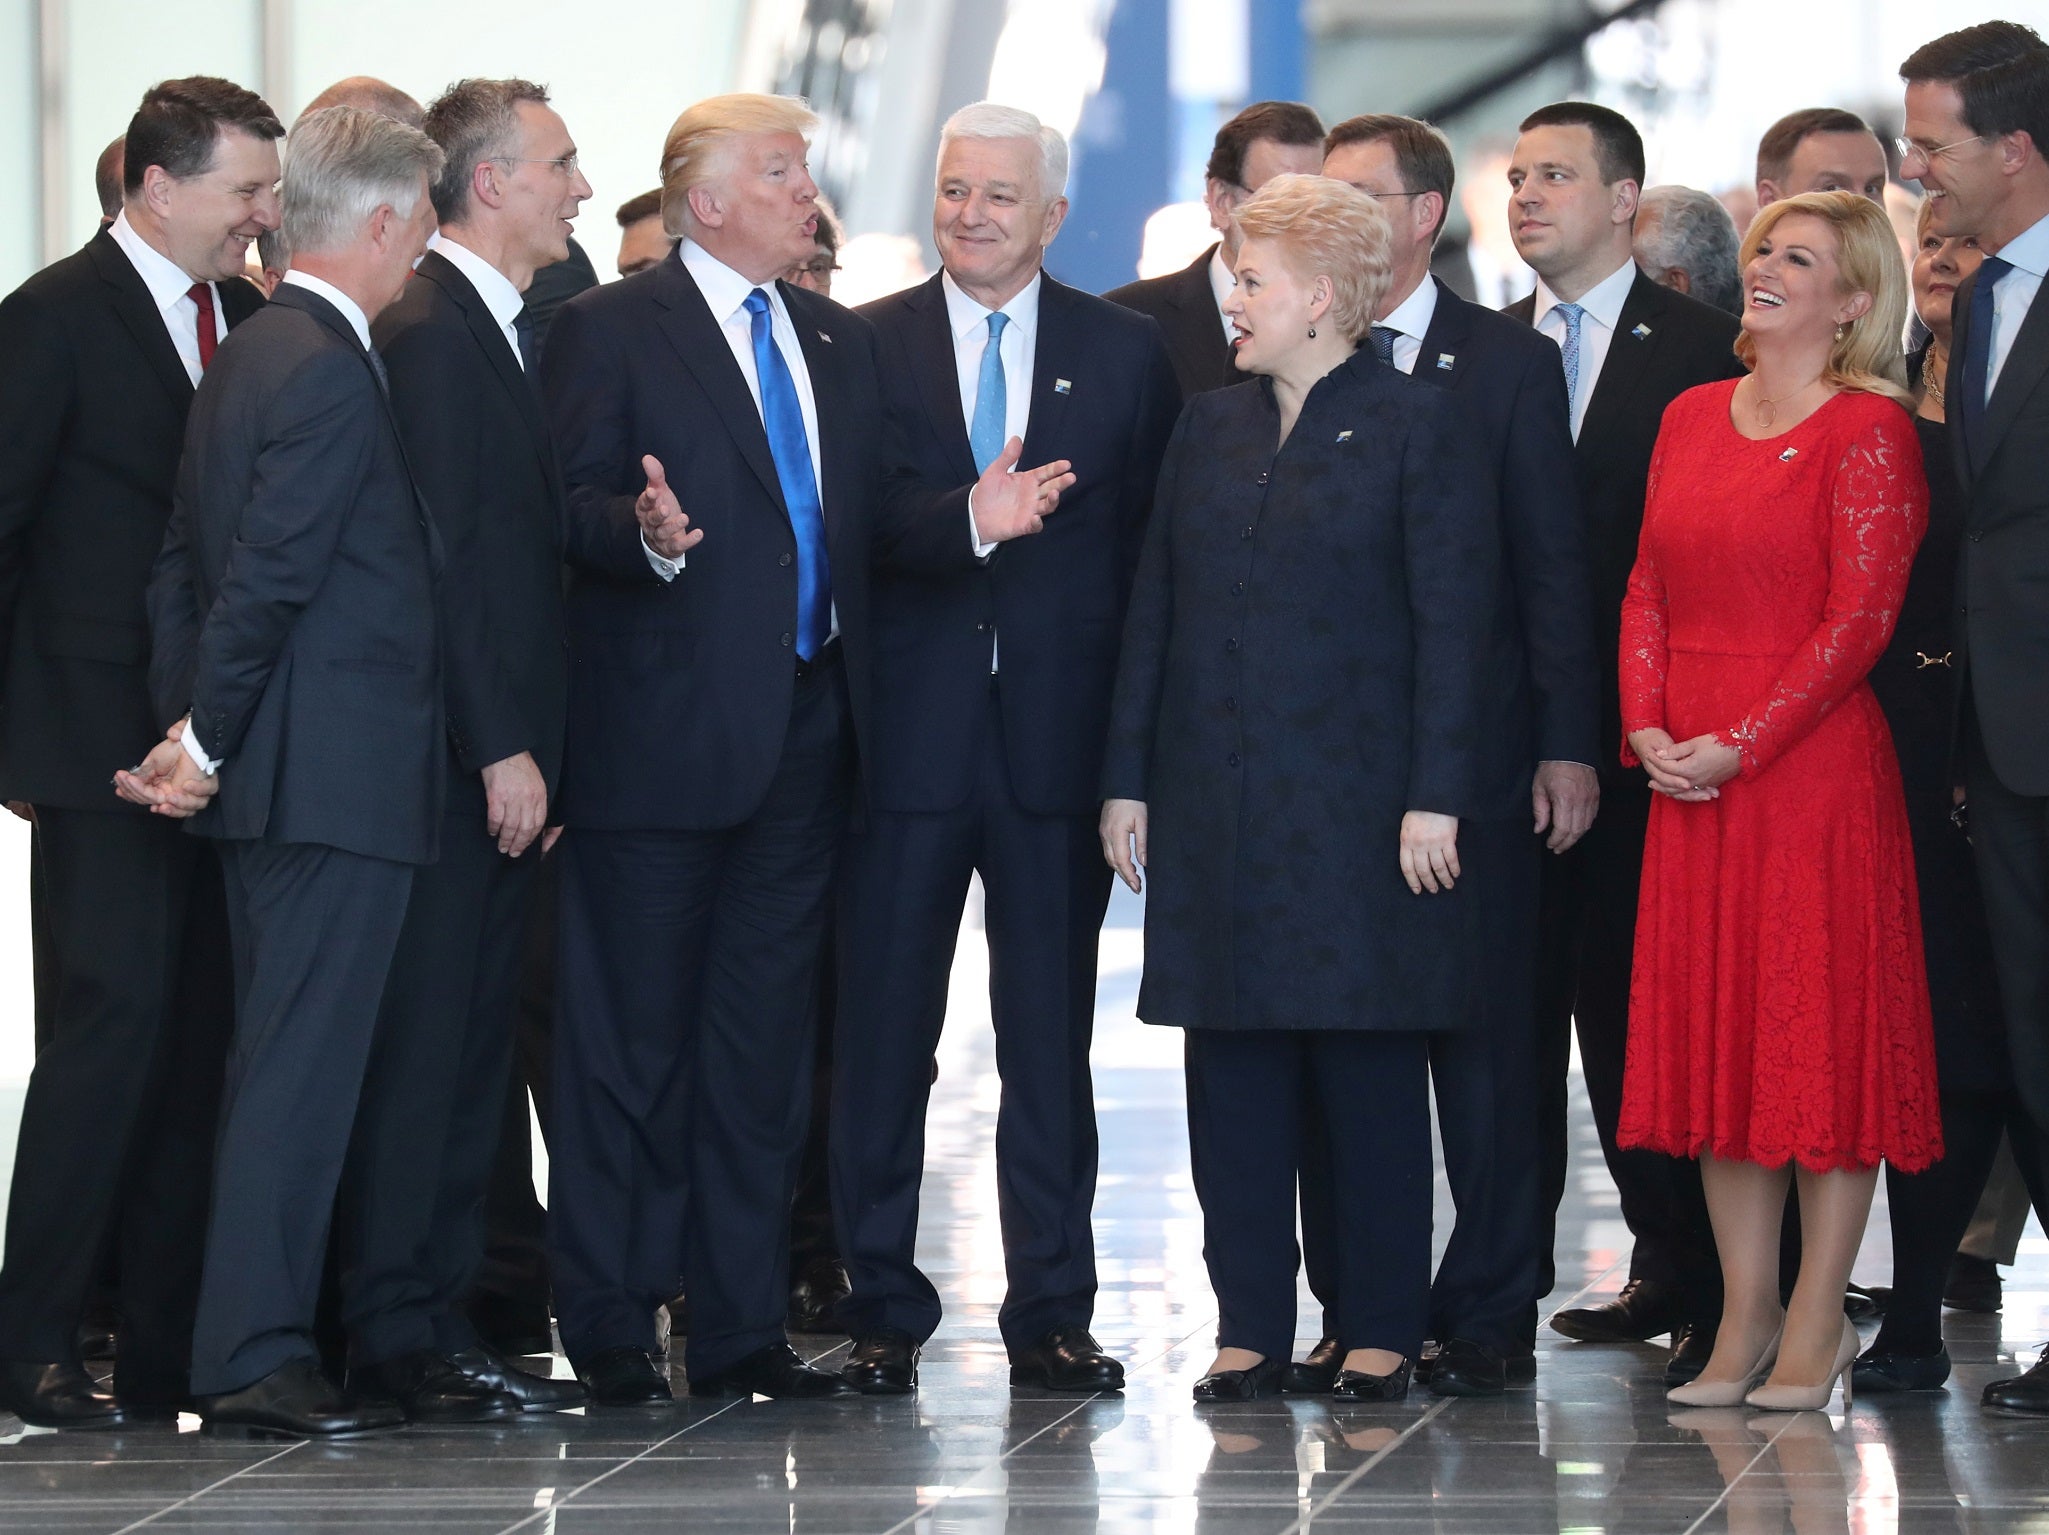 Montenegro's Prime Minister Dusko Markovic is seen to the right of Donald Trump at a Nato summit in Brussels